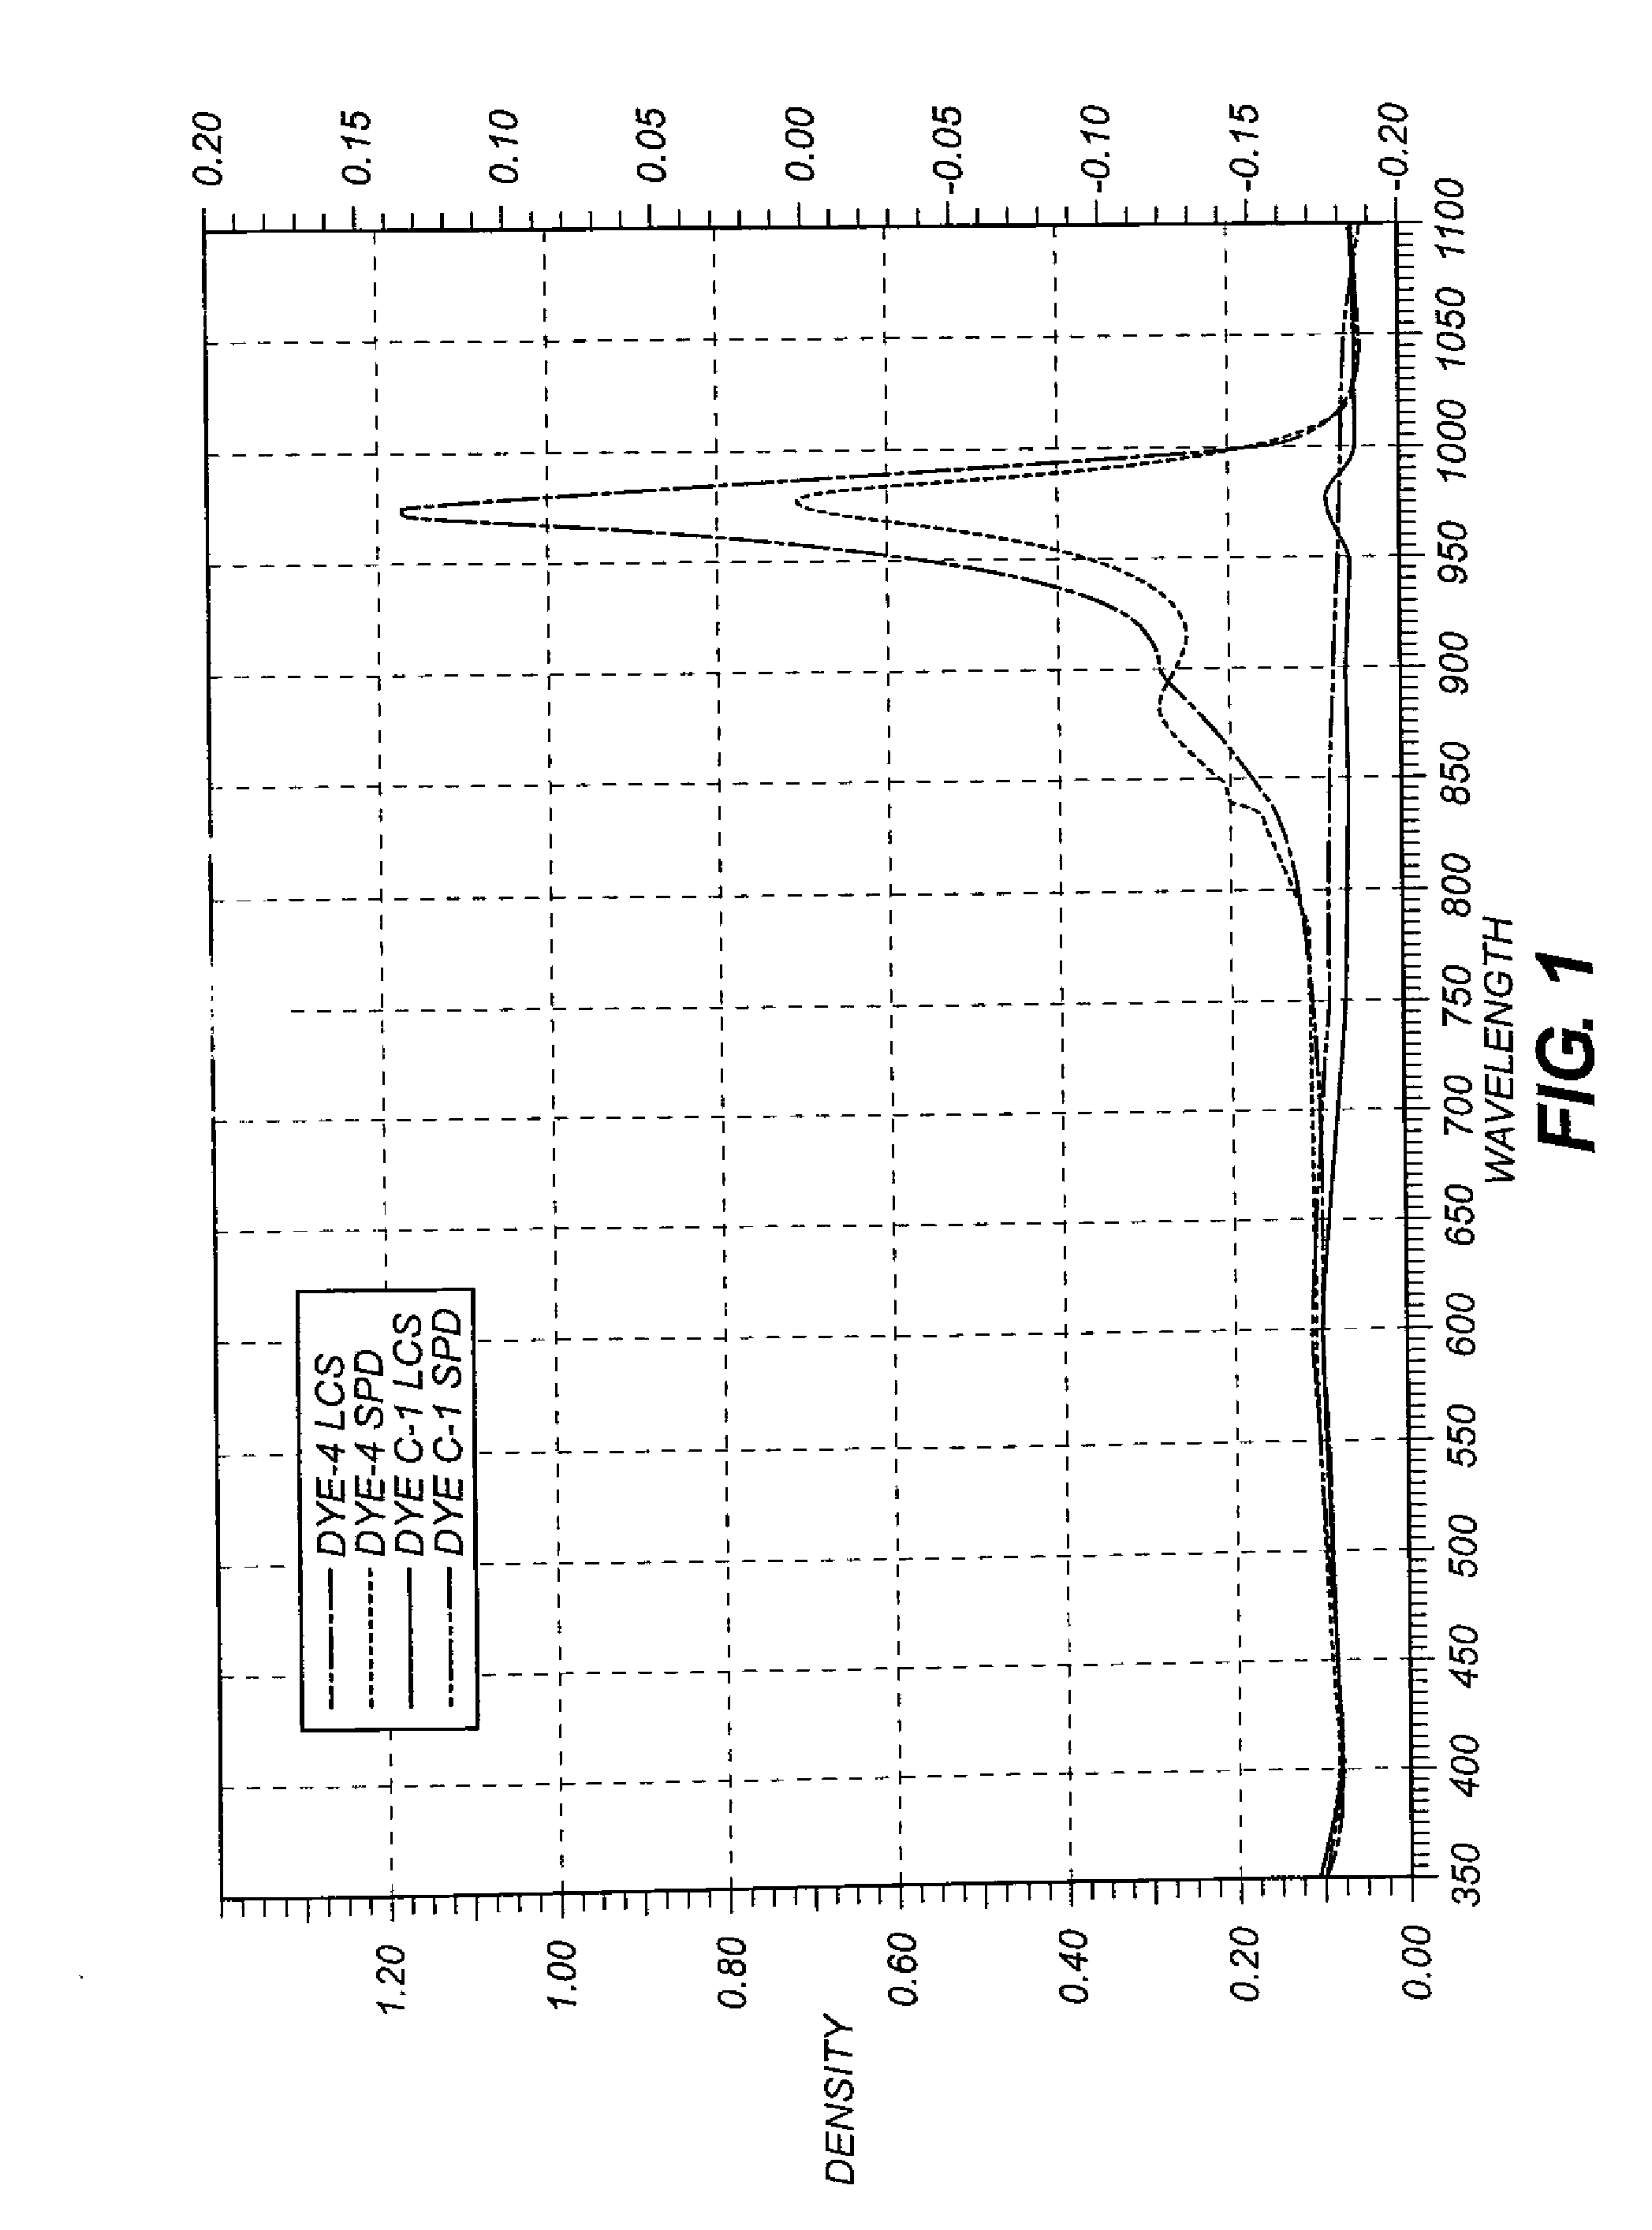 Infrared dye for silver halide-based photographic elements